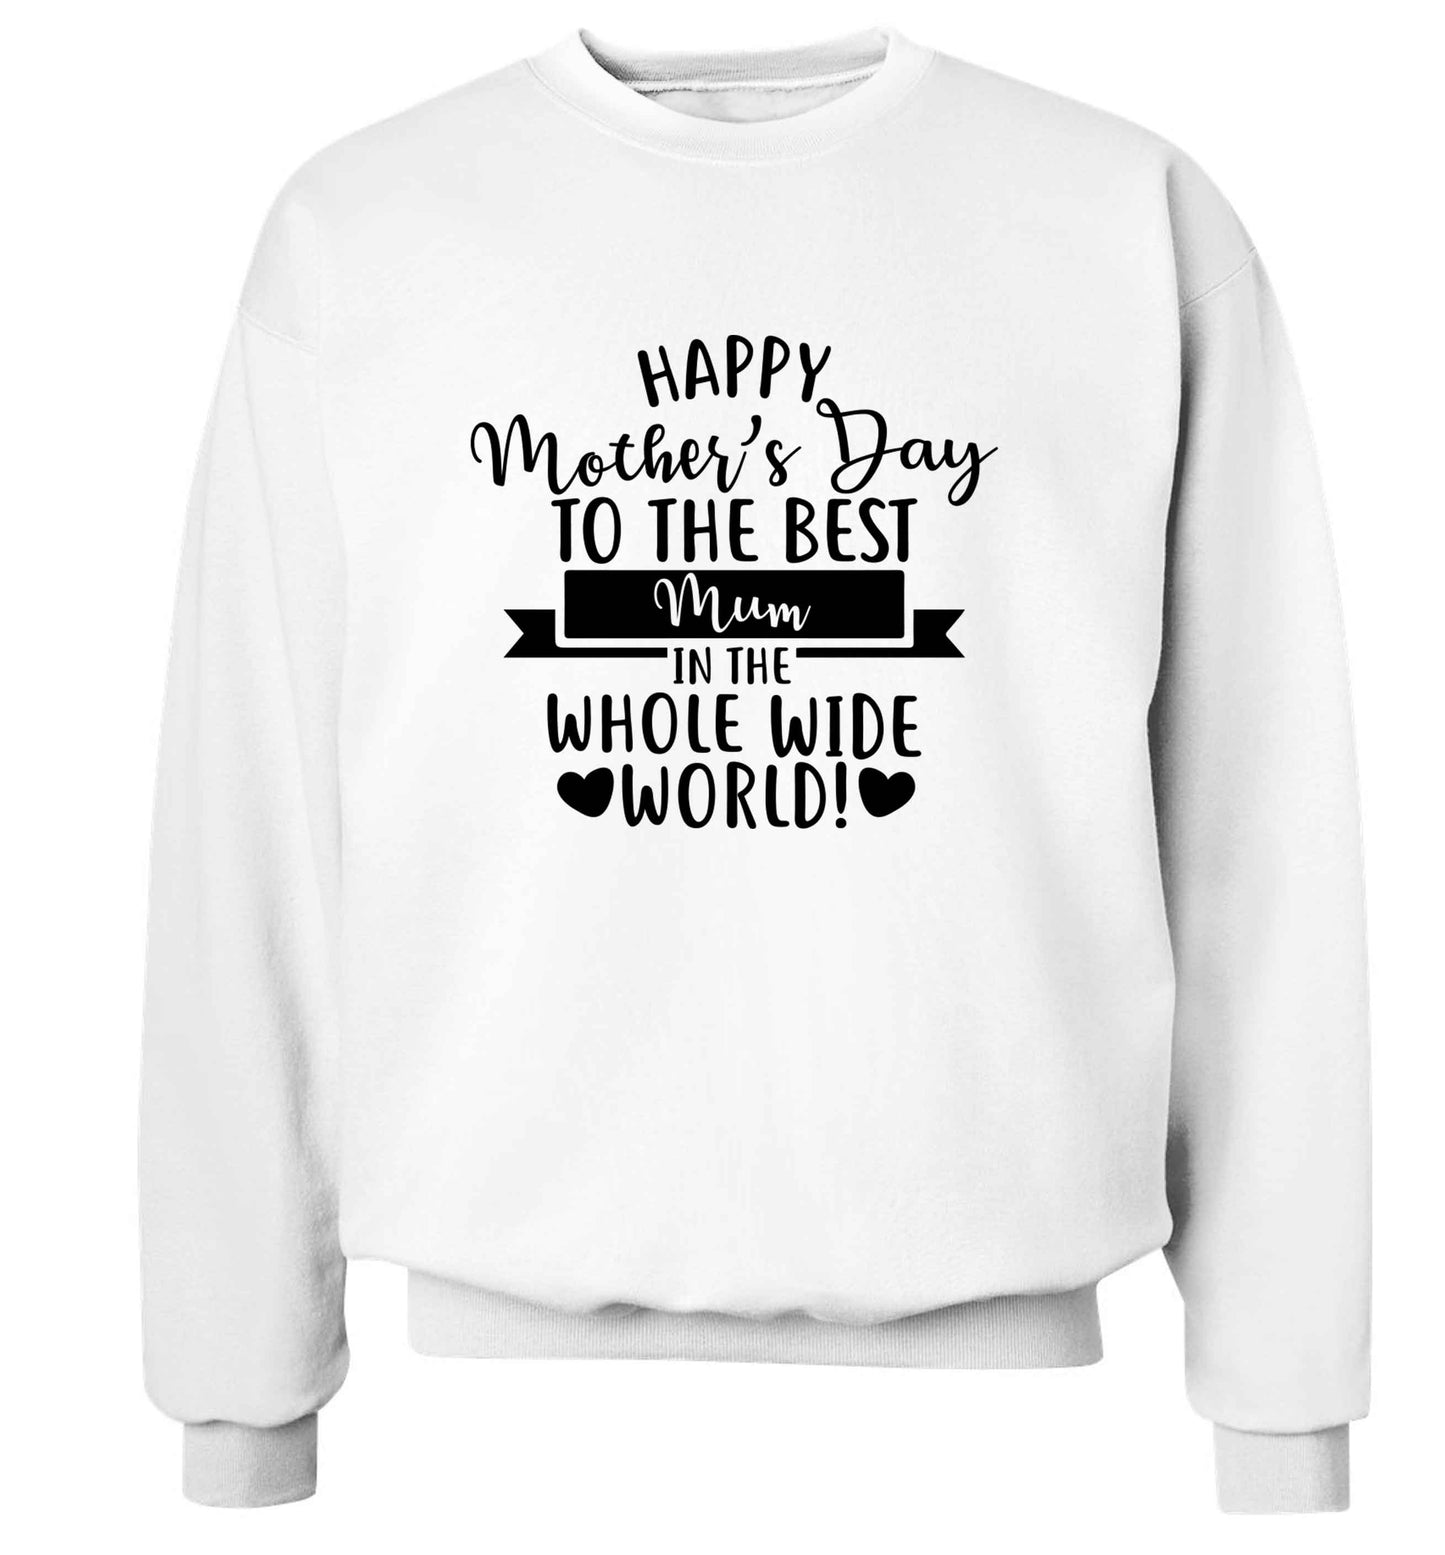 Happy mother's day to the best mum in the world adult's unisex white sweater 2XL